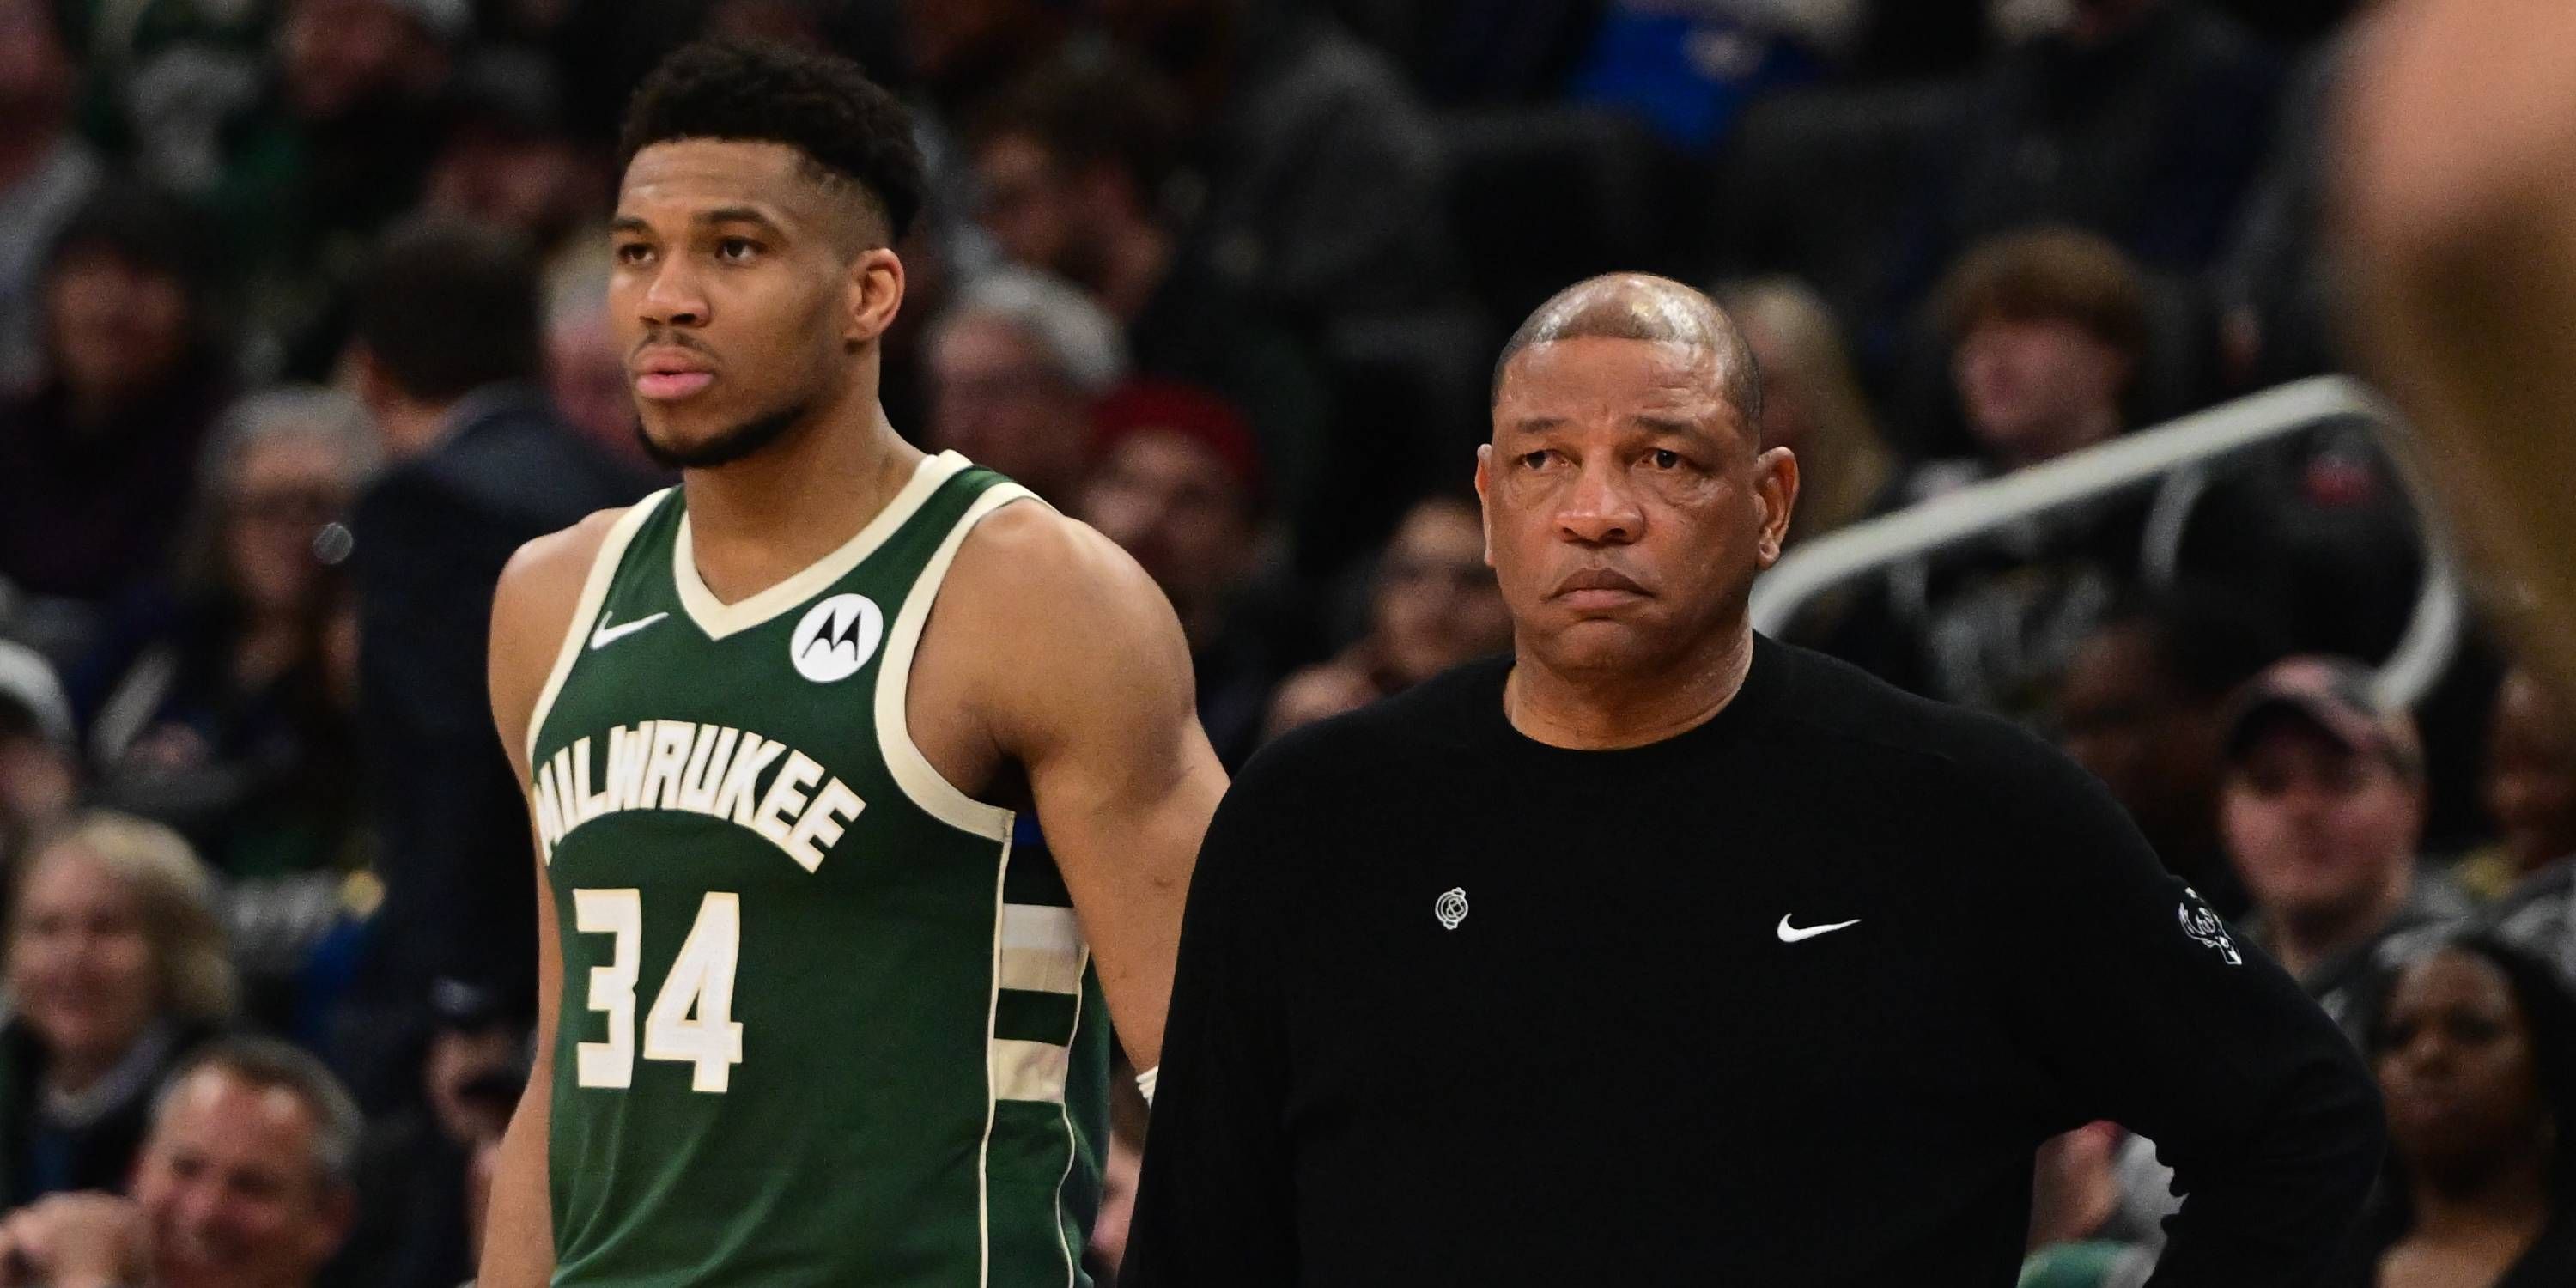 Doc Rivers and Giannis Antetokounmpo stand together courtside.